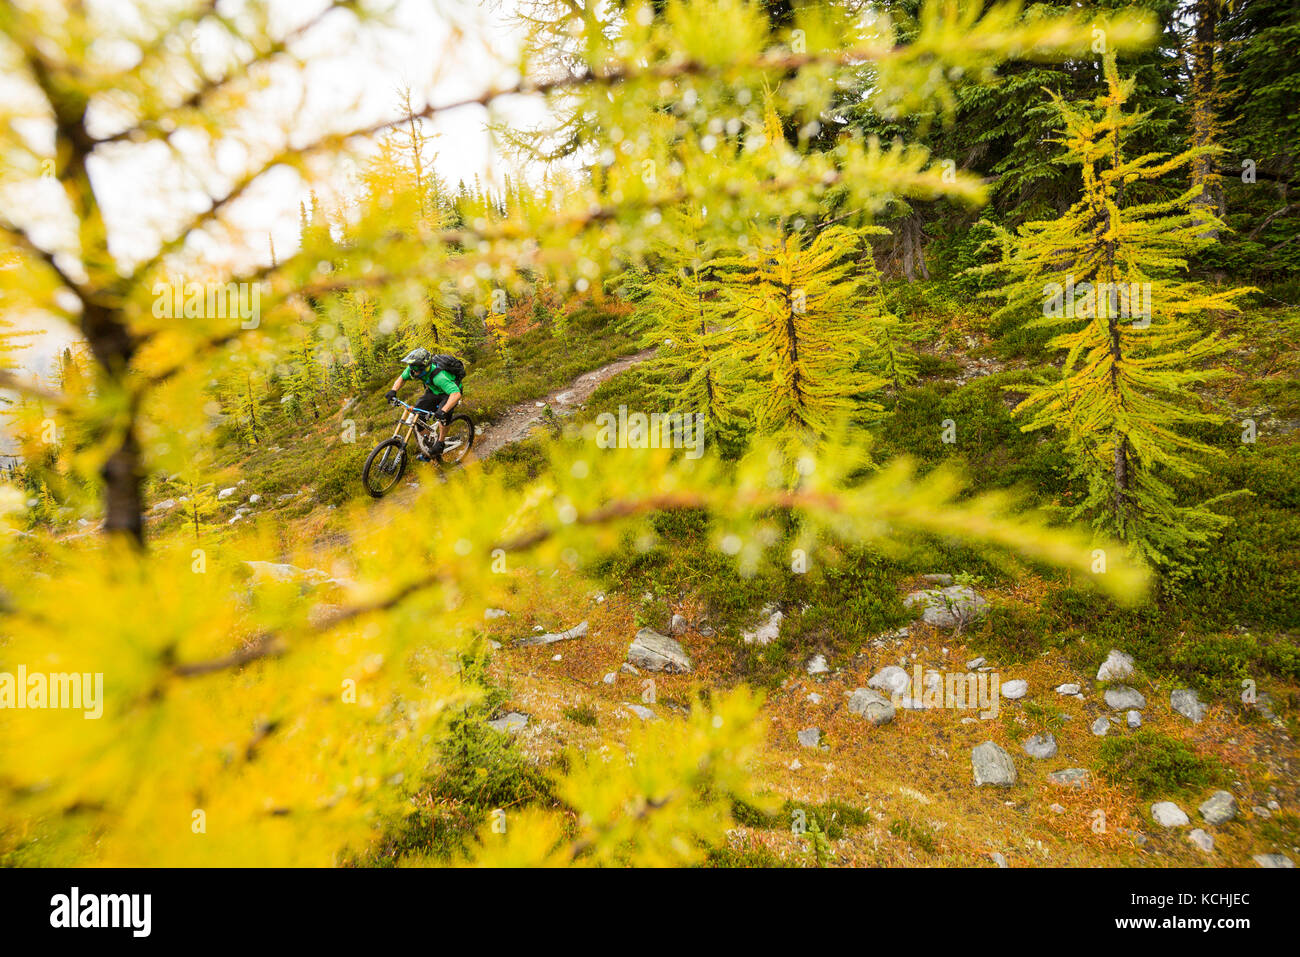 A mountain biker rides down a trail behind yellow larch trees at Jumbo Pass, British Columbia Stock Photo